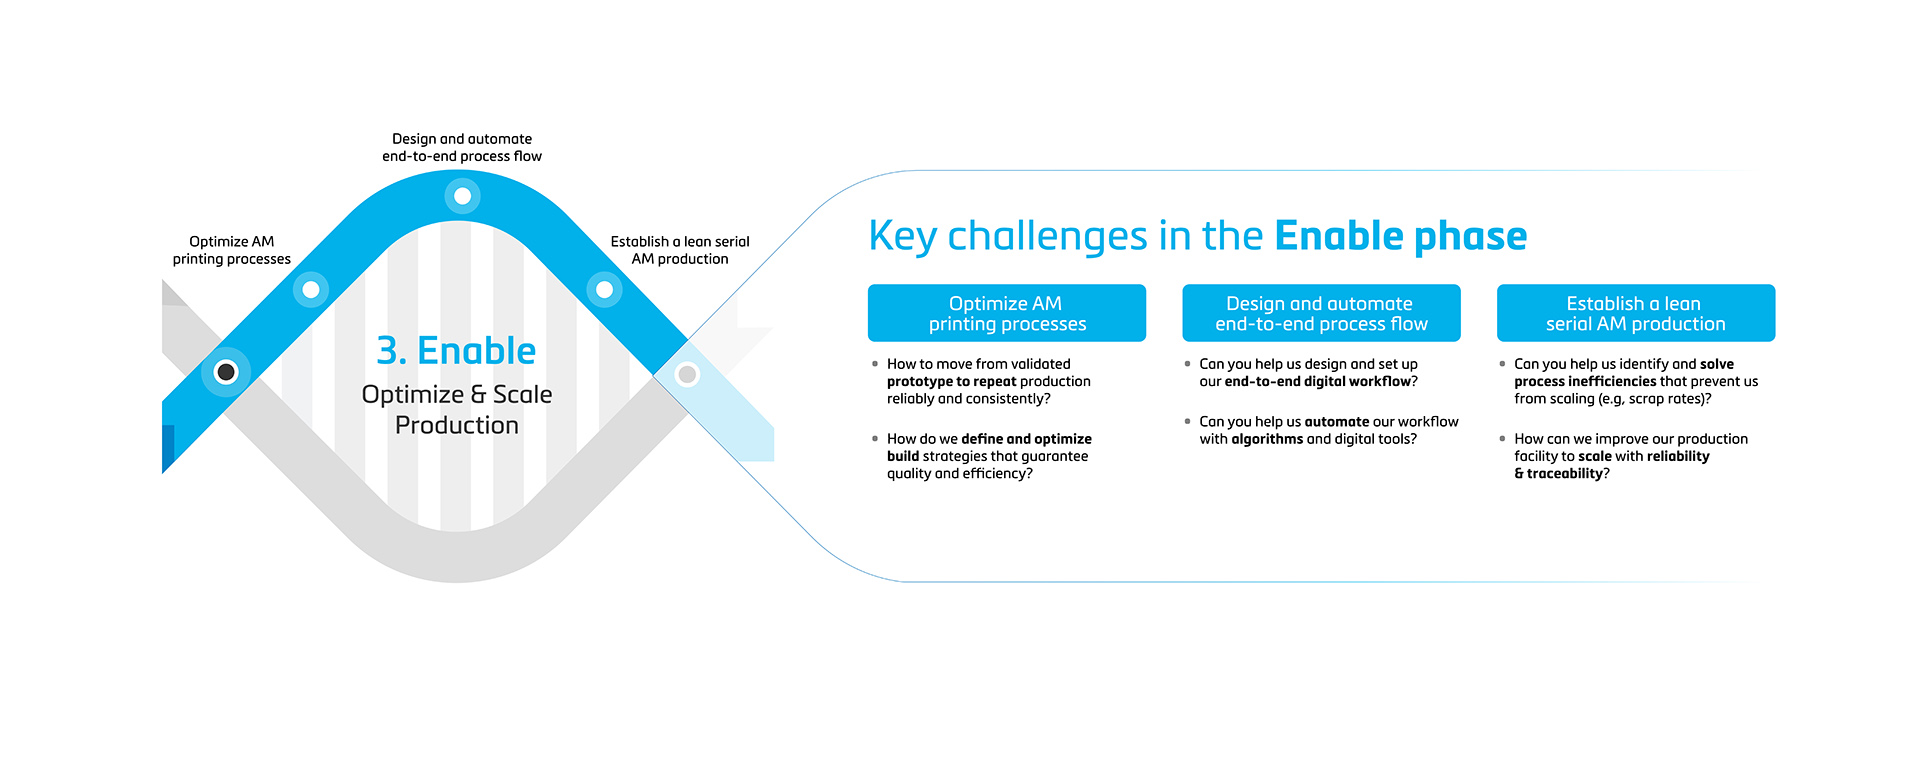 Key challenges related to the Enable phase of the additive manufacturing workflow 